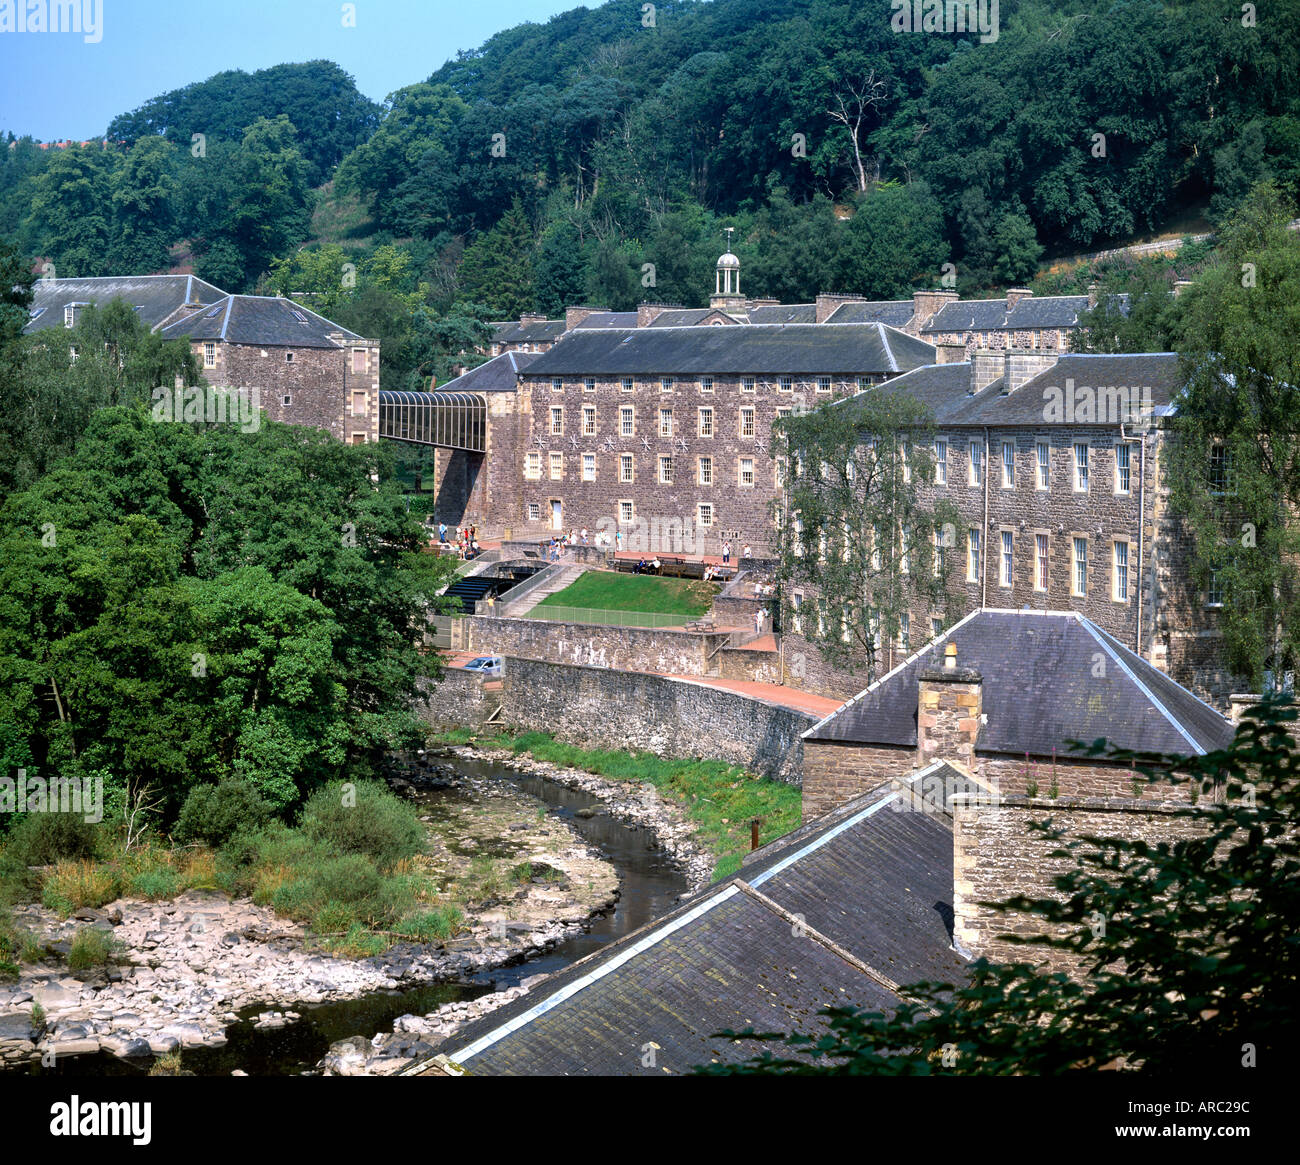 Part of the historic New Lanark mills built between 1785 and 1793 at New Lanark, Strathclyde, Scotland. Stock Photo